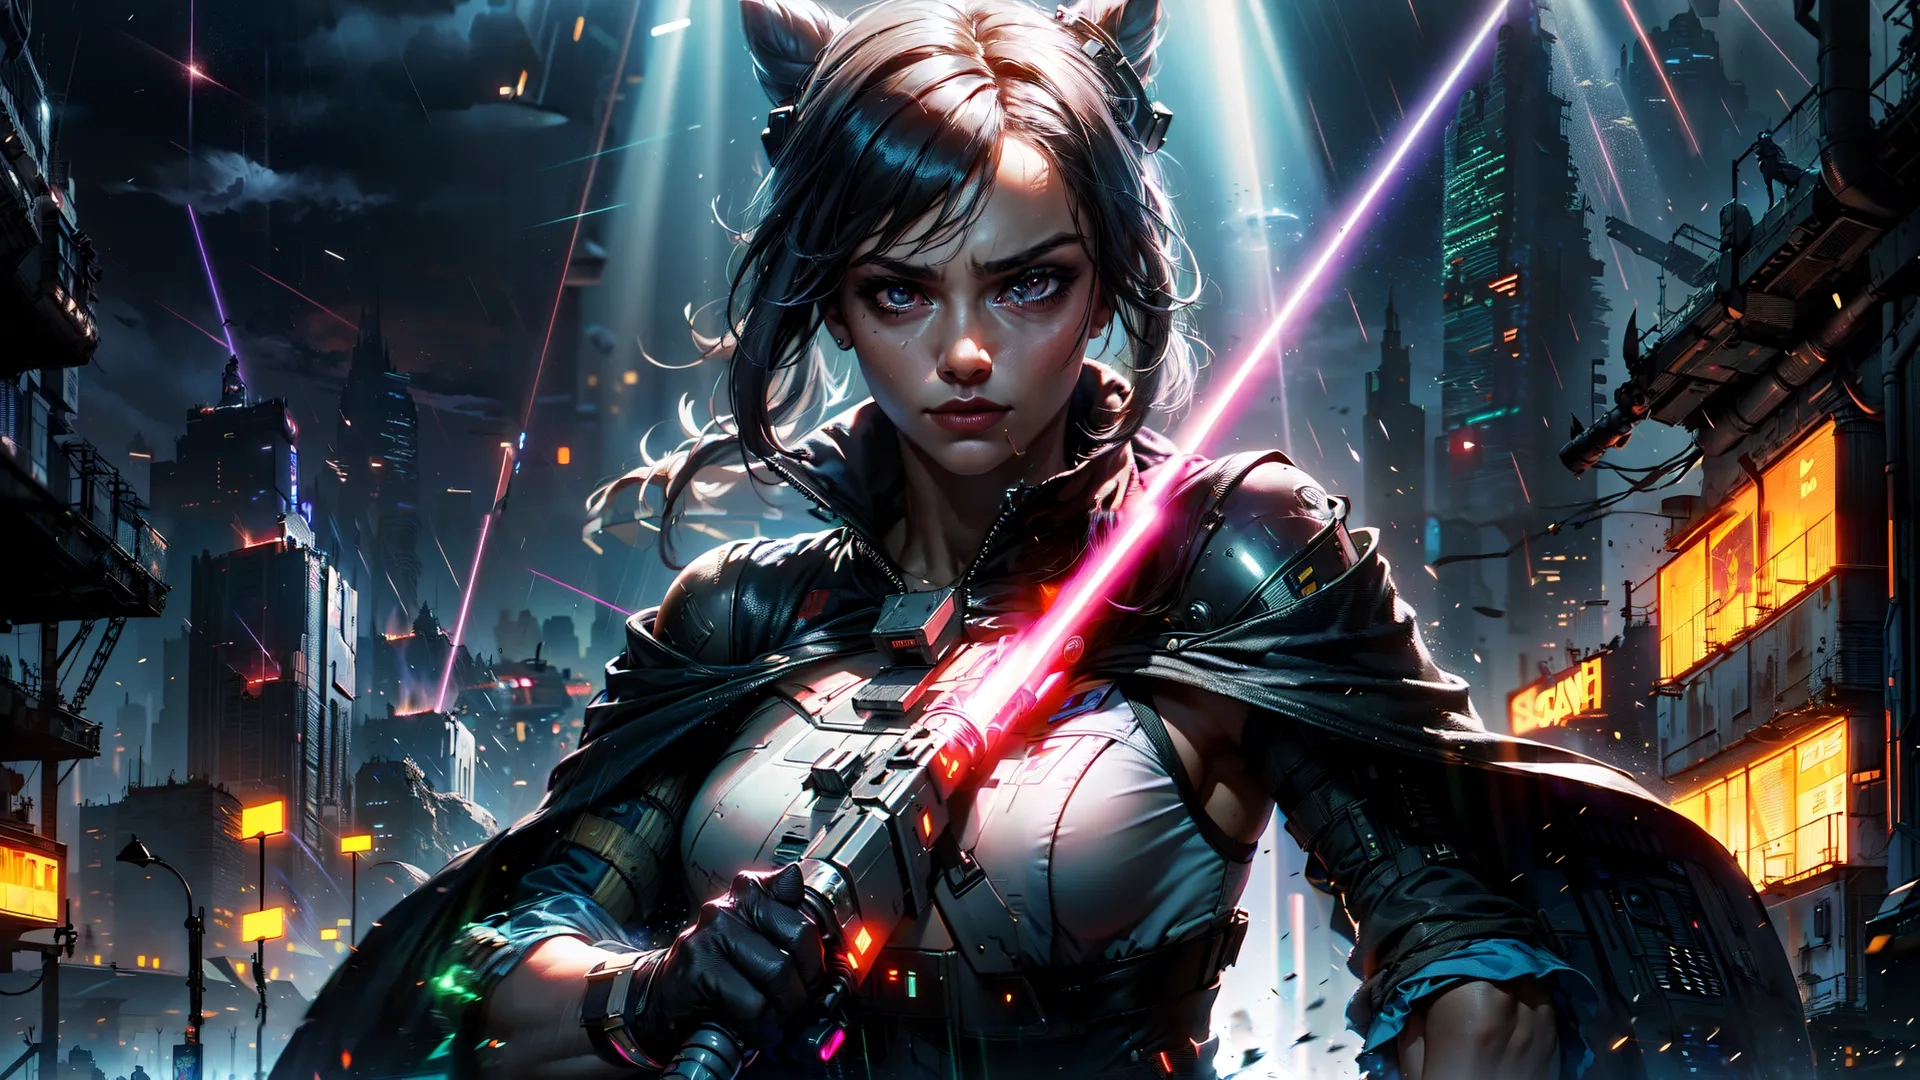 an image of a woman with lightsabest from the game overwatching in the city, holding a sword and looking at the camera
